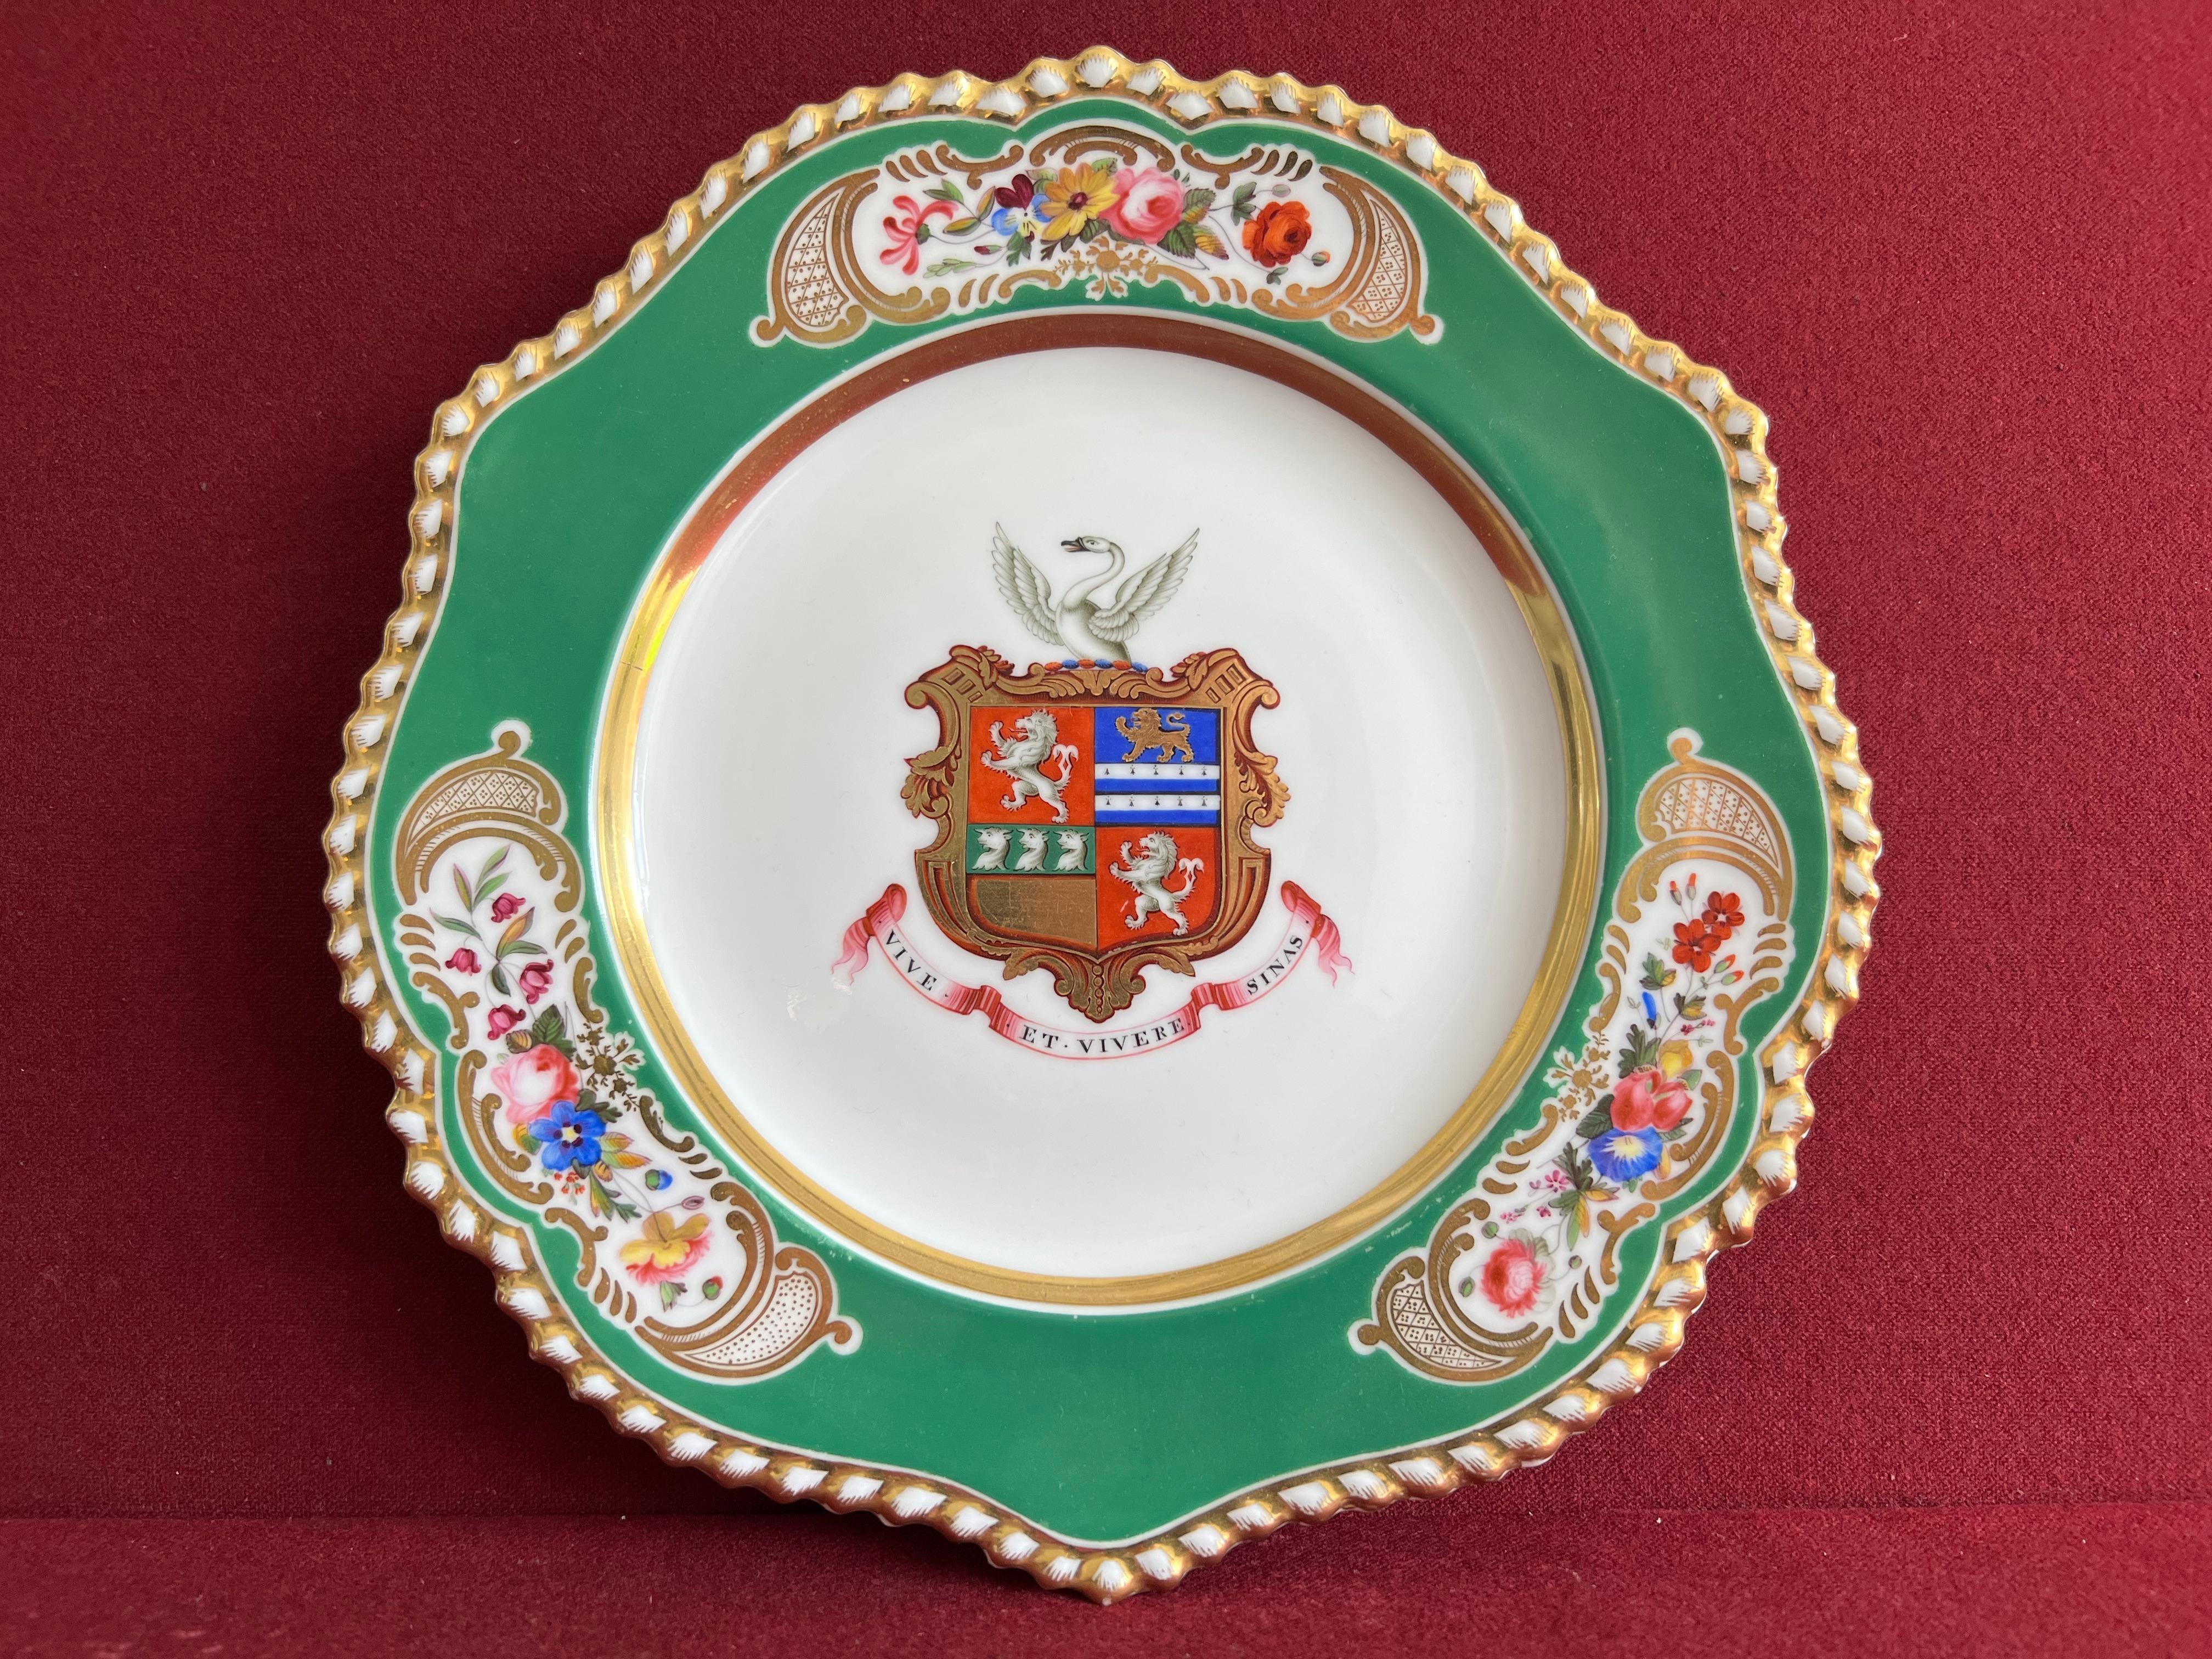 A fine Chamberlain’s Worcester porcelain large plate c.1830. Very finely decorated with the arms of the Attwood family within a dark green border with hand painted flower panels and with a moulded gadroon edge.


Script